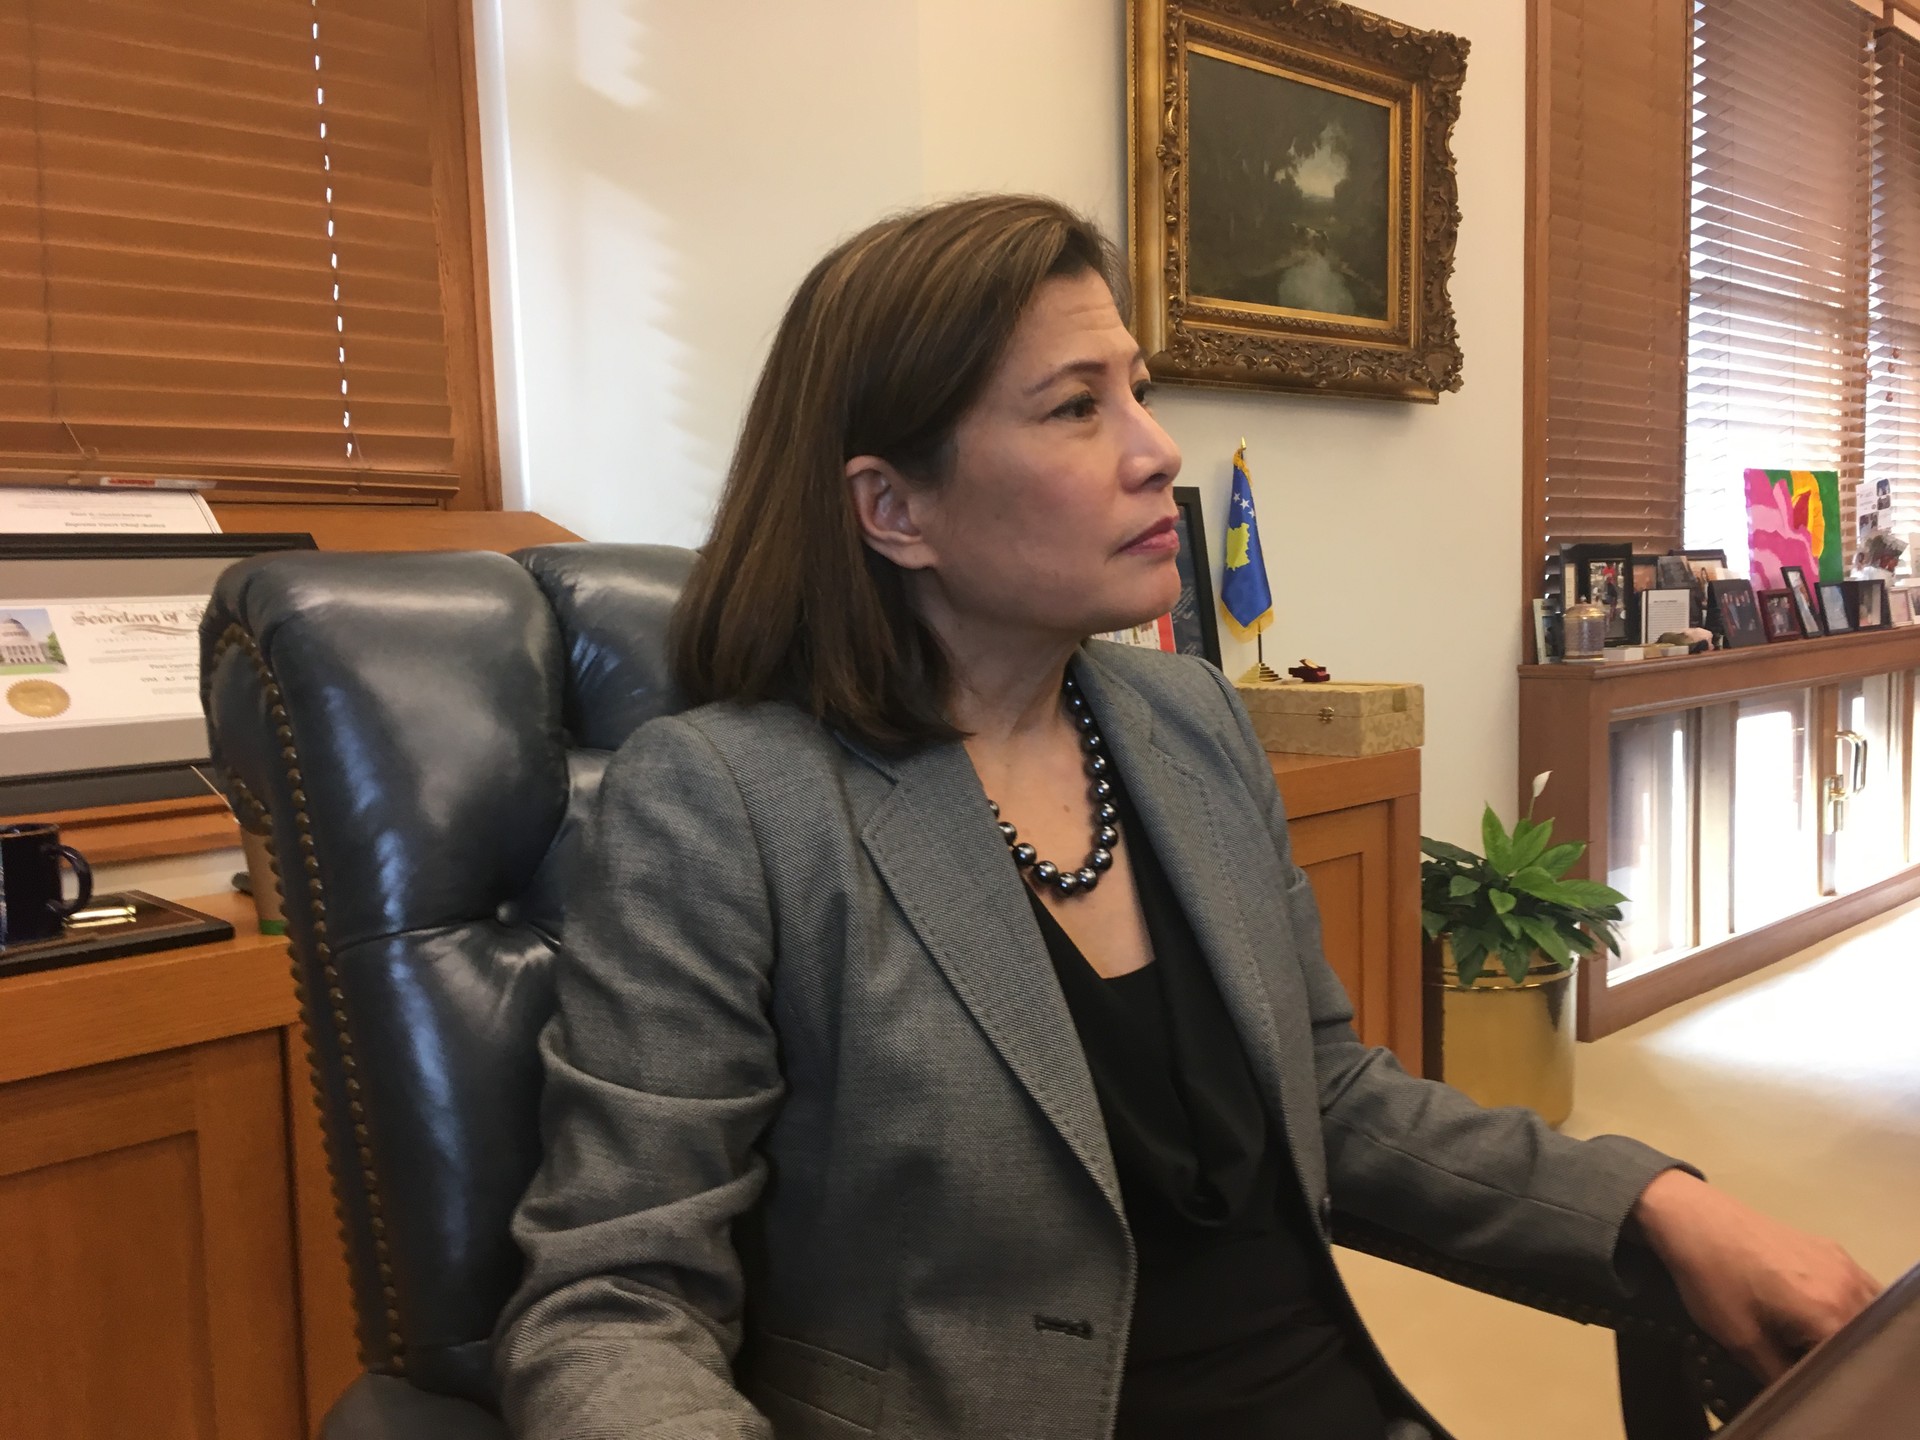 California Supreme Court Chief Justice Tani Cantil-Sakauye responds to Governor Jerry Brown's proposal to do away with driver's license suspensions as debt collection tool.